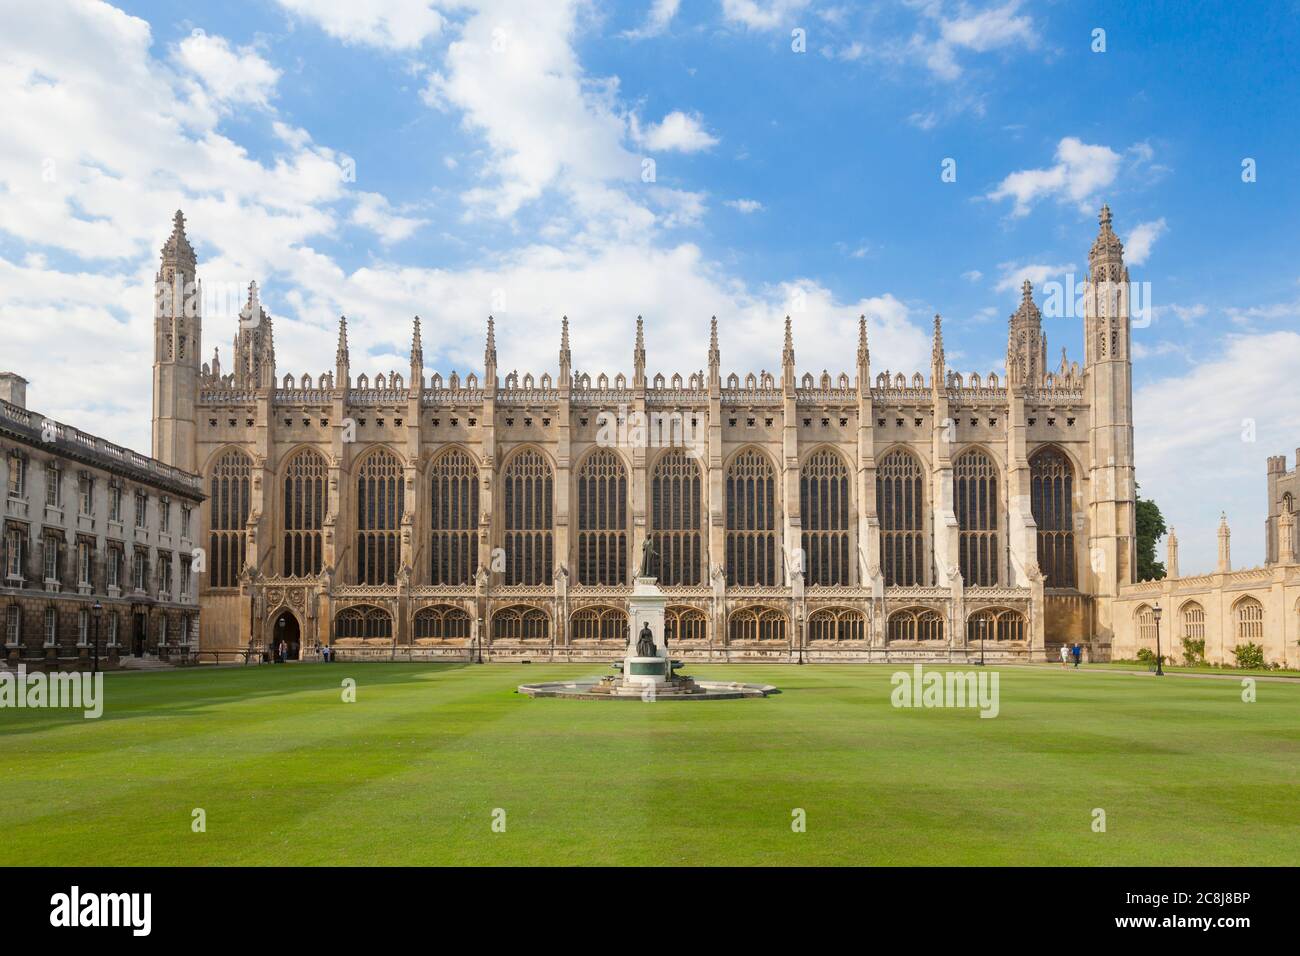 Kings college chapel as seen from the front court, Cambridge, England Stock Photo